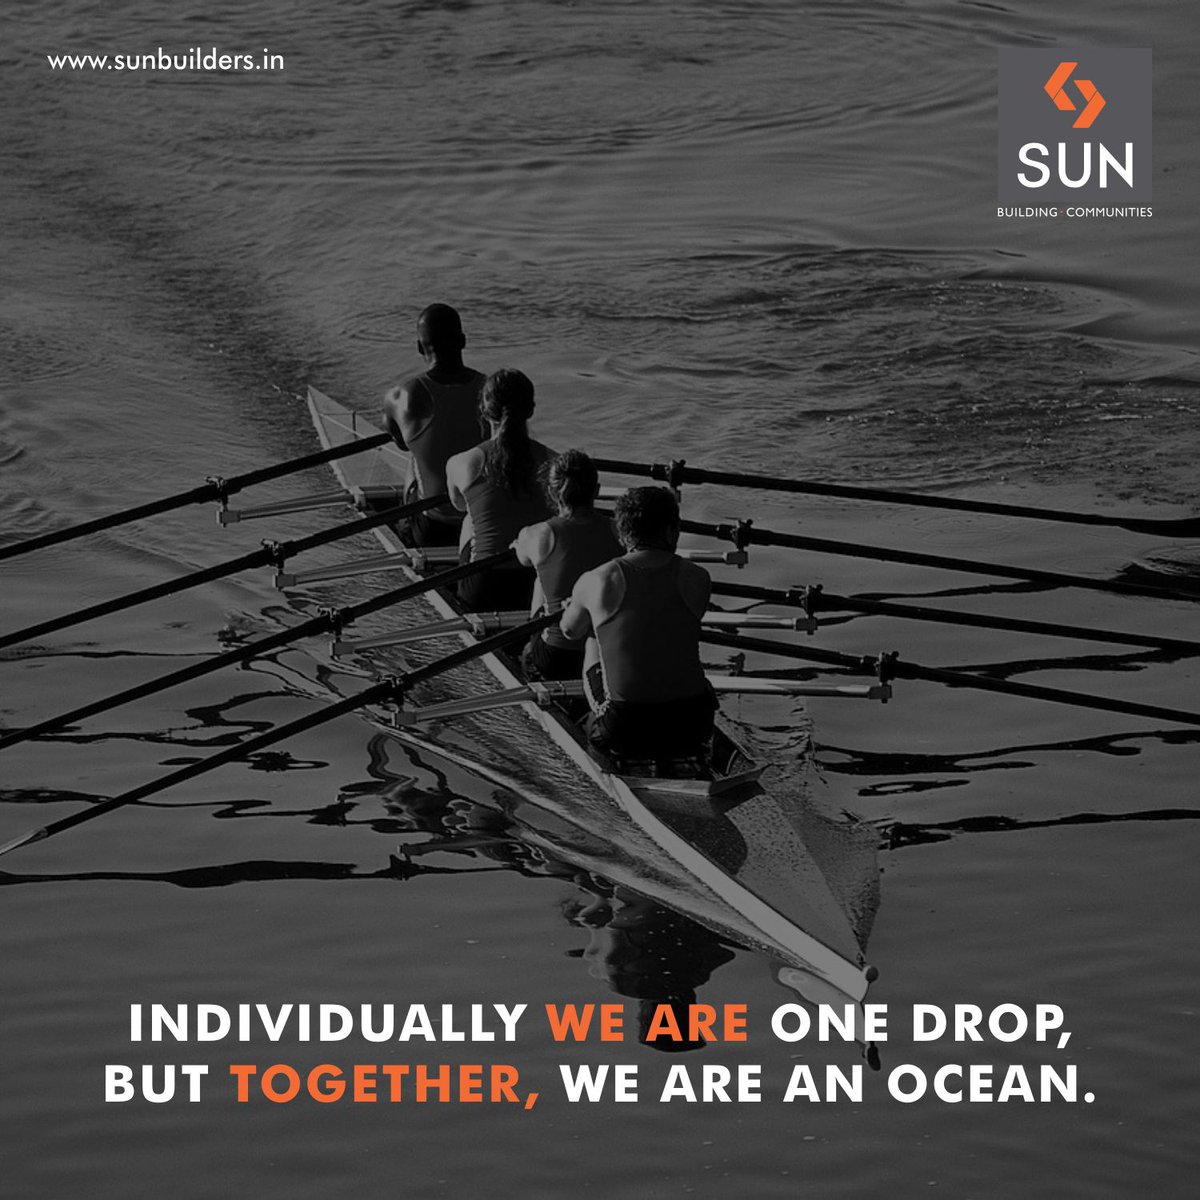 #Teamwork & collaboration makes it easy to achieve your desired goals. And, #Unity is one of your biggest strength. https://t.co/J0HooABtUY